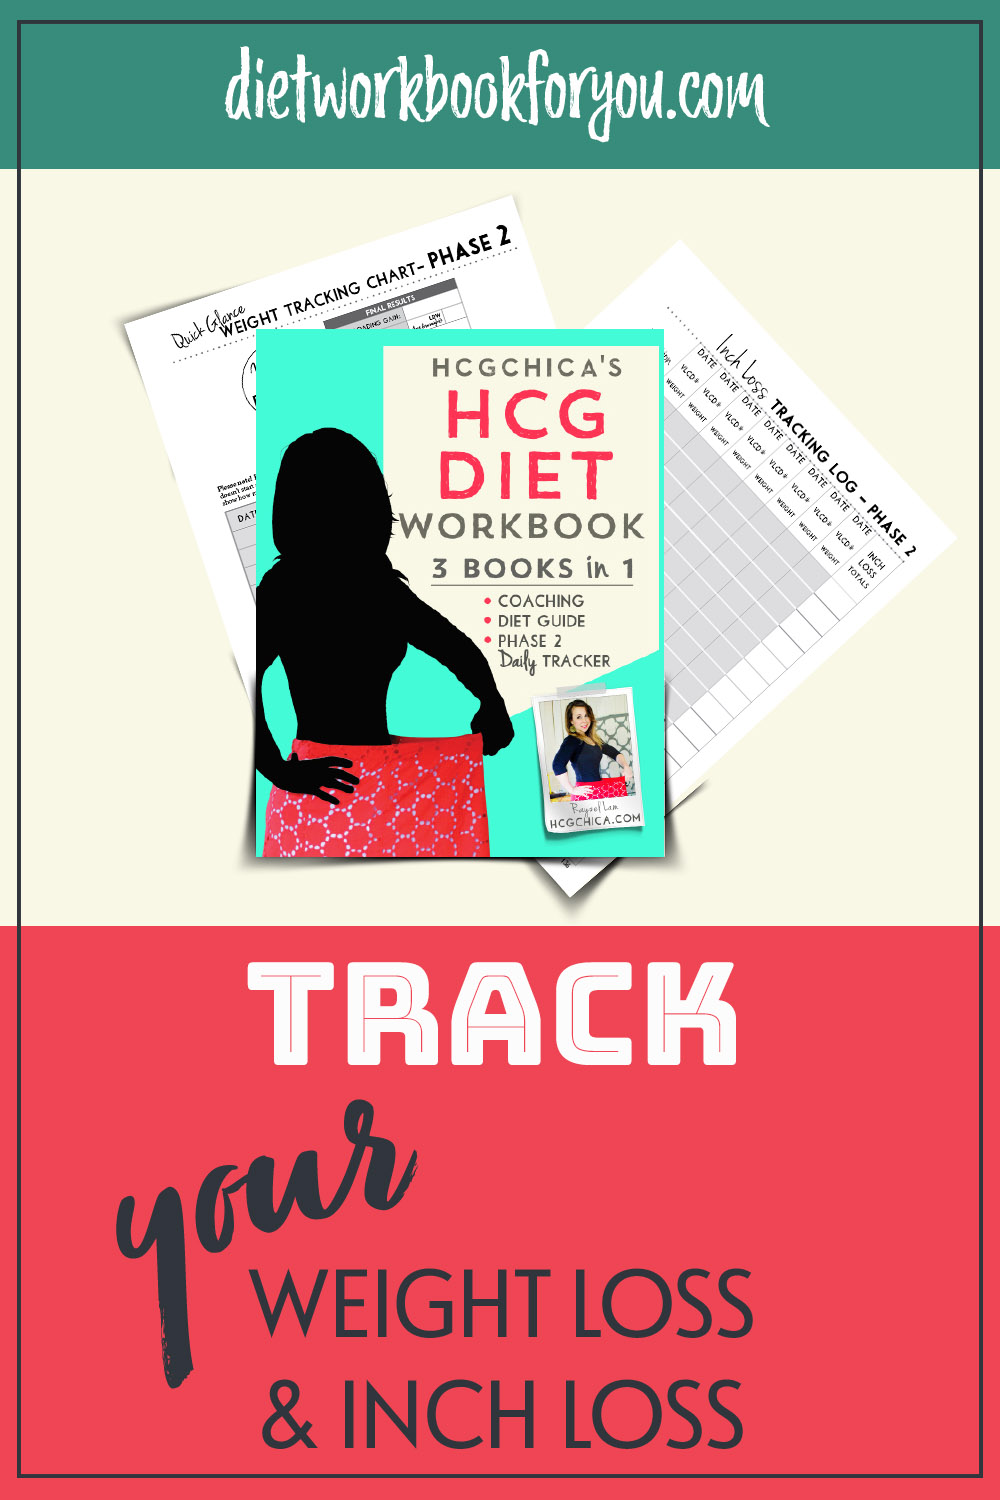 hCG Diet Workbook Journal - Reusable Printable Downloadable - Diet Guide, Coaching, Phase 2 Daily Tracker